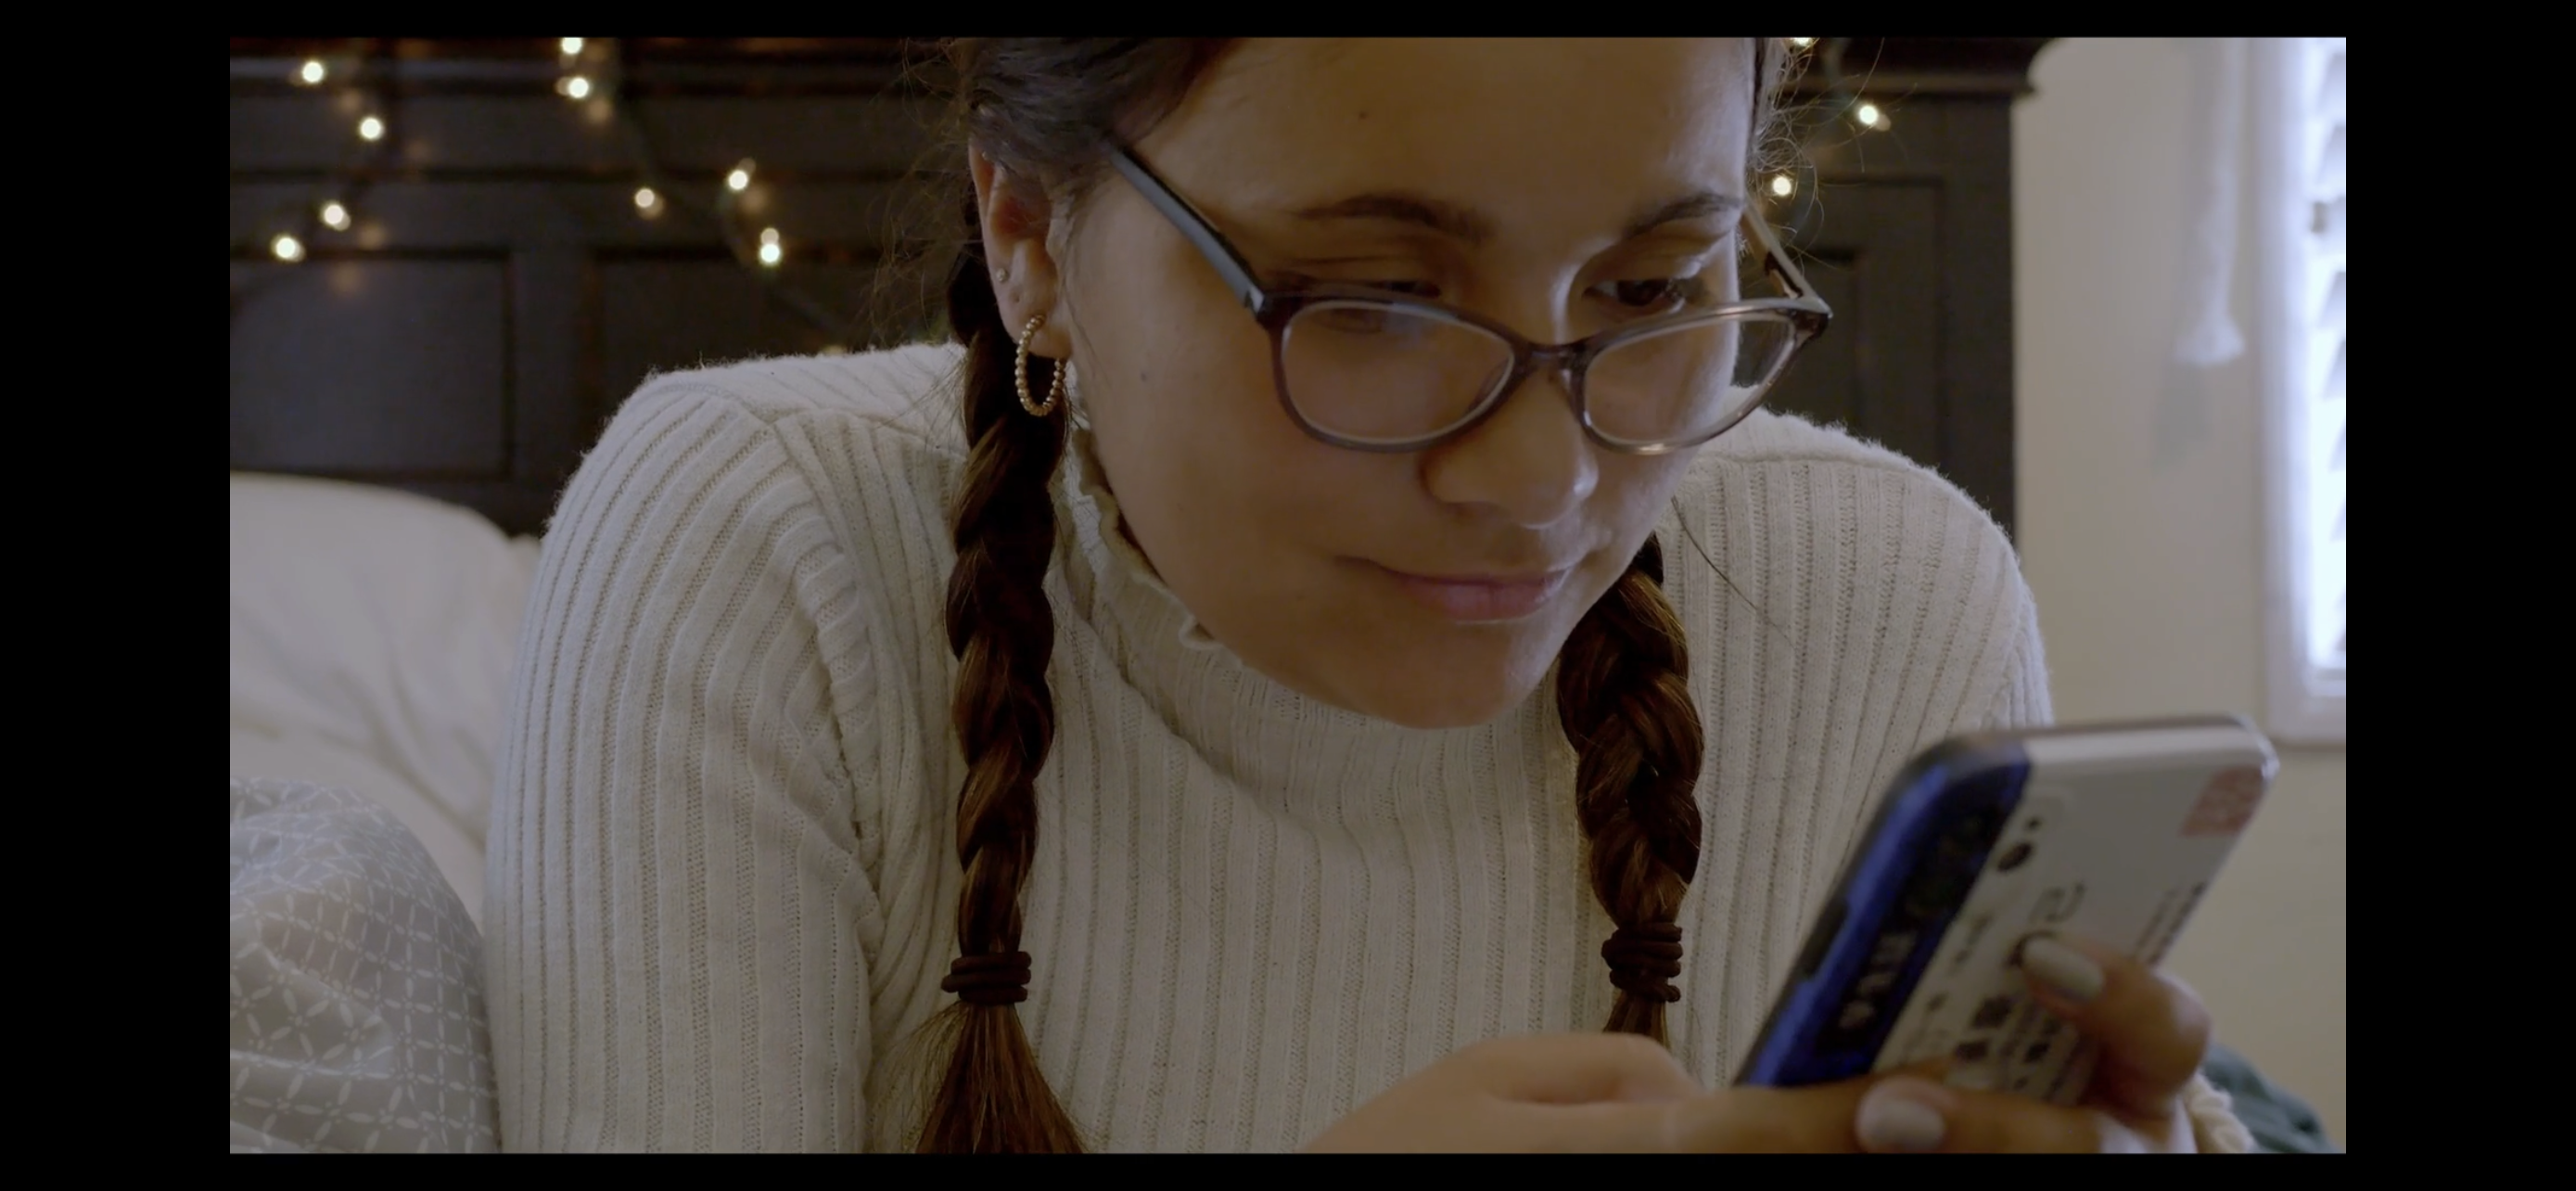 Teenage girl with braids and glasses sits on bed texting